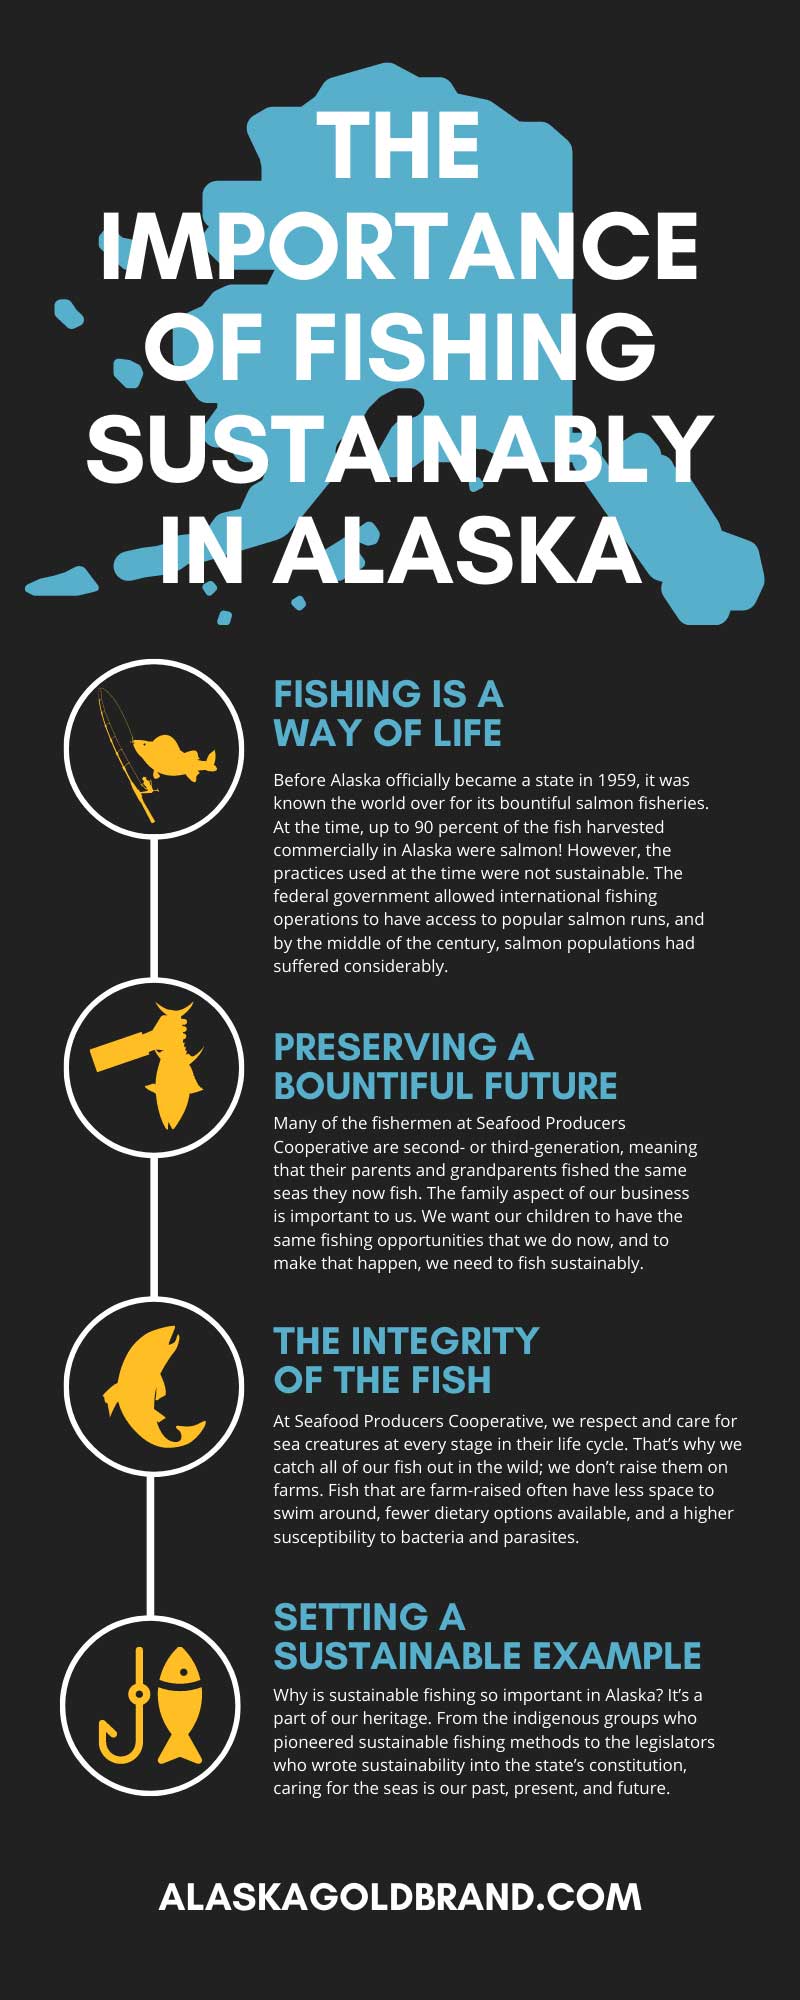 The Importance of Fishing Sustainably in Alaska